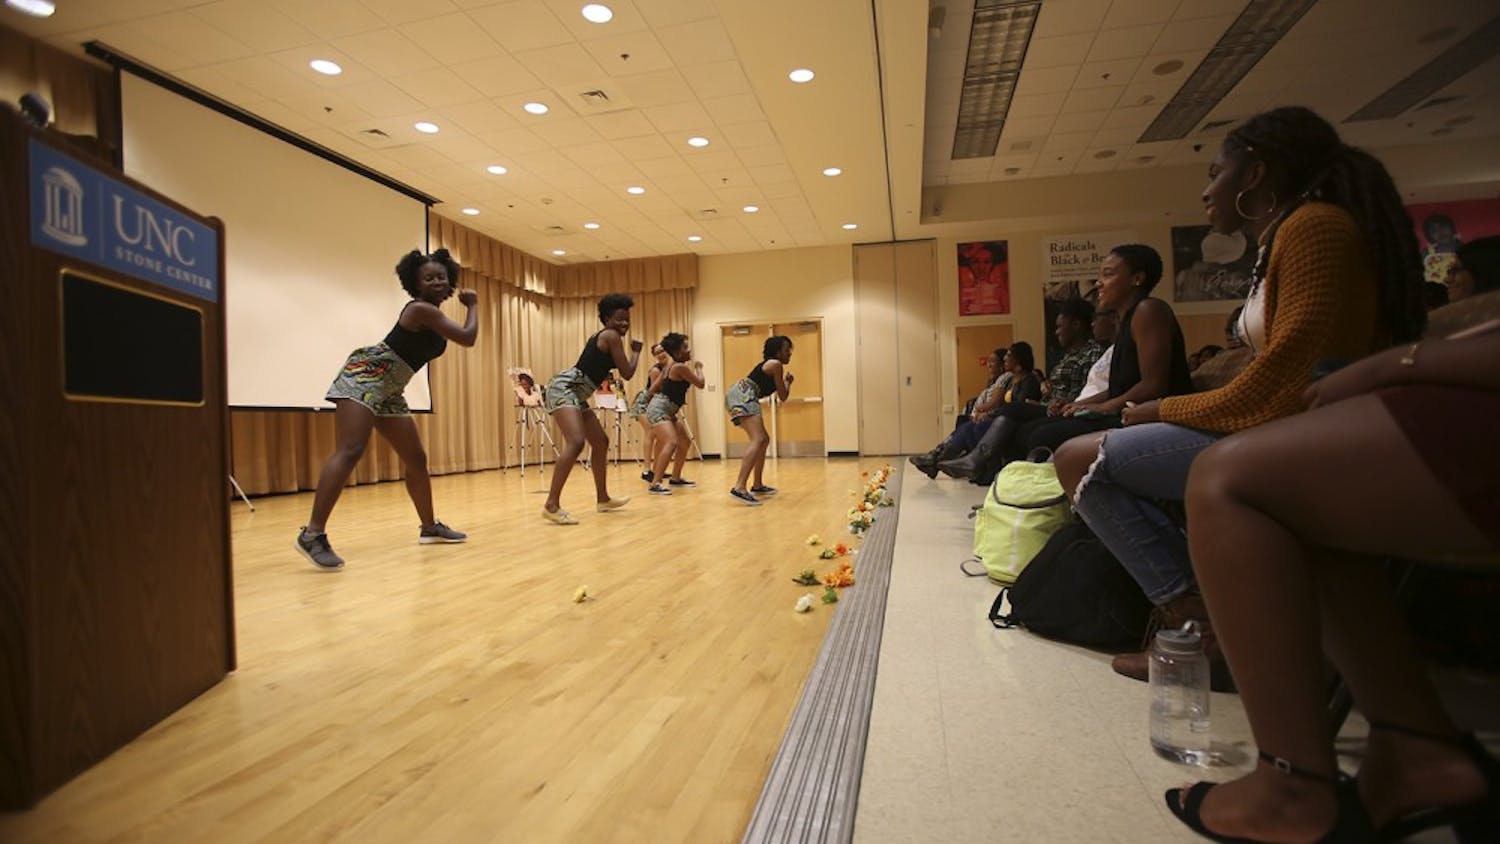 Zankiliwa, an African dance troupe at UNC, performs at Milk and Honey, an event hosted by The Bridge featuring dance, poetry, song, and other performances. The event took place in the Sonja Haynes Stone Center on Tuesday night.